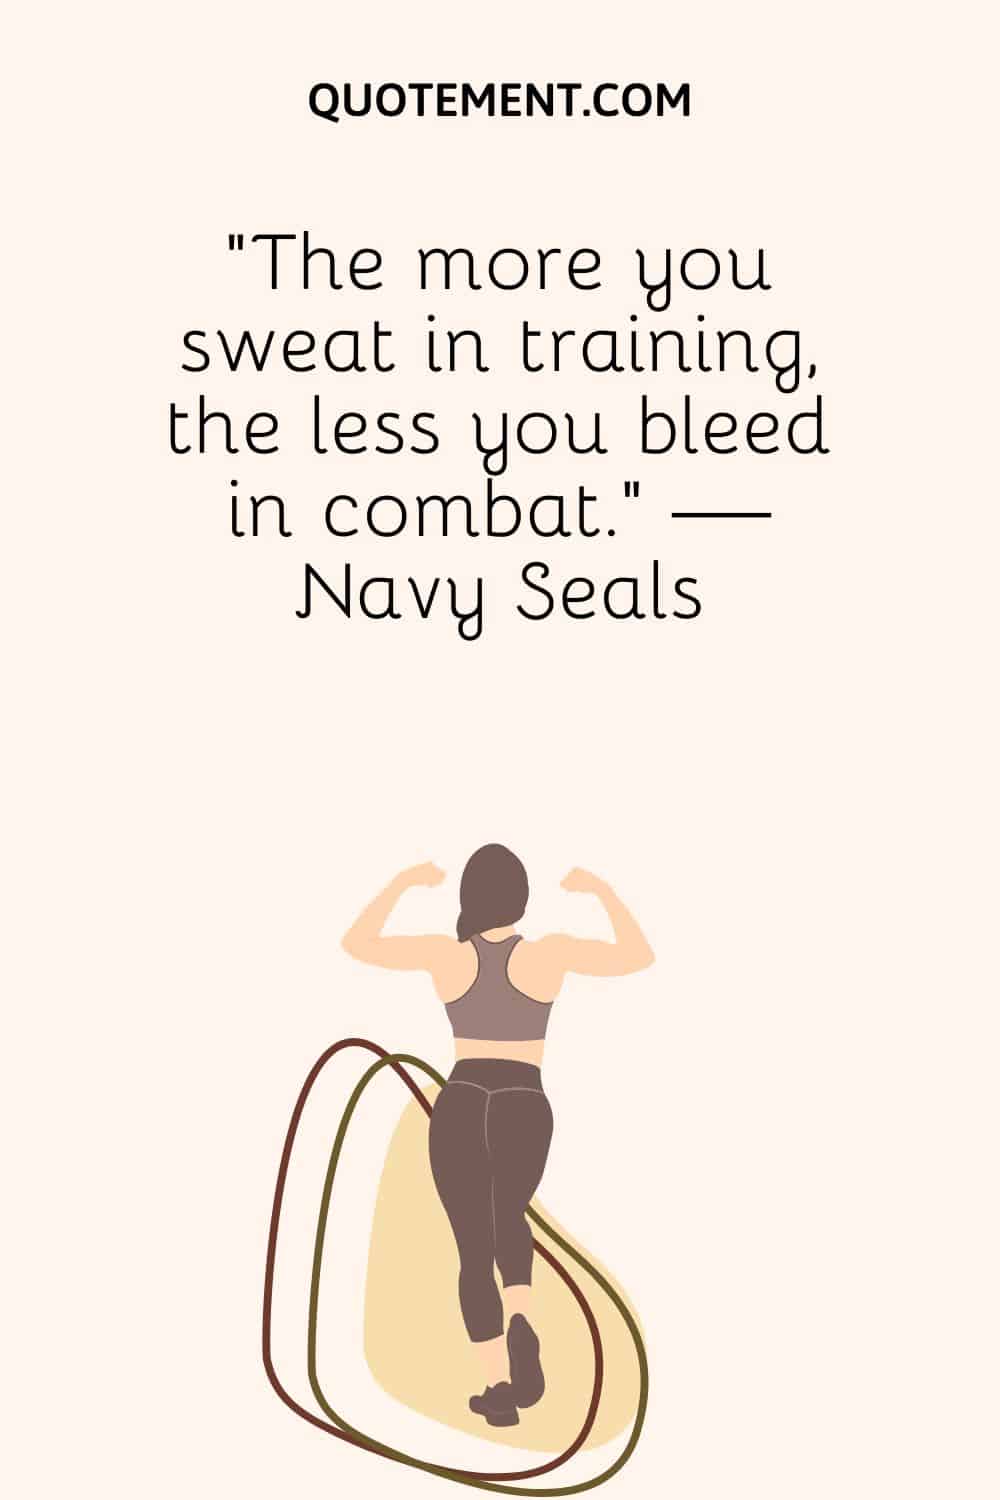 “The more you sweat in training, the less you bleed in combat.” — Navy Seals